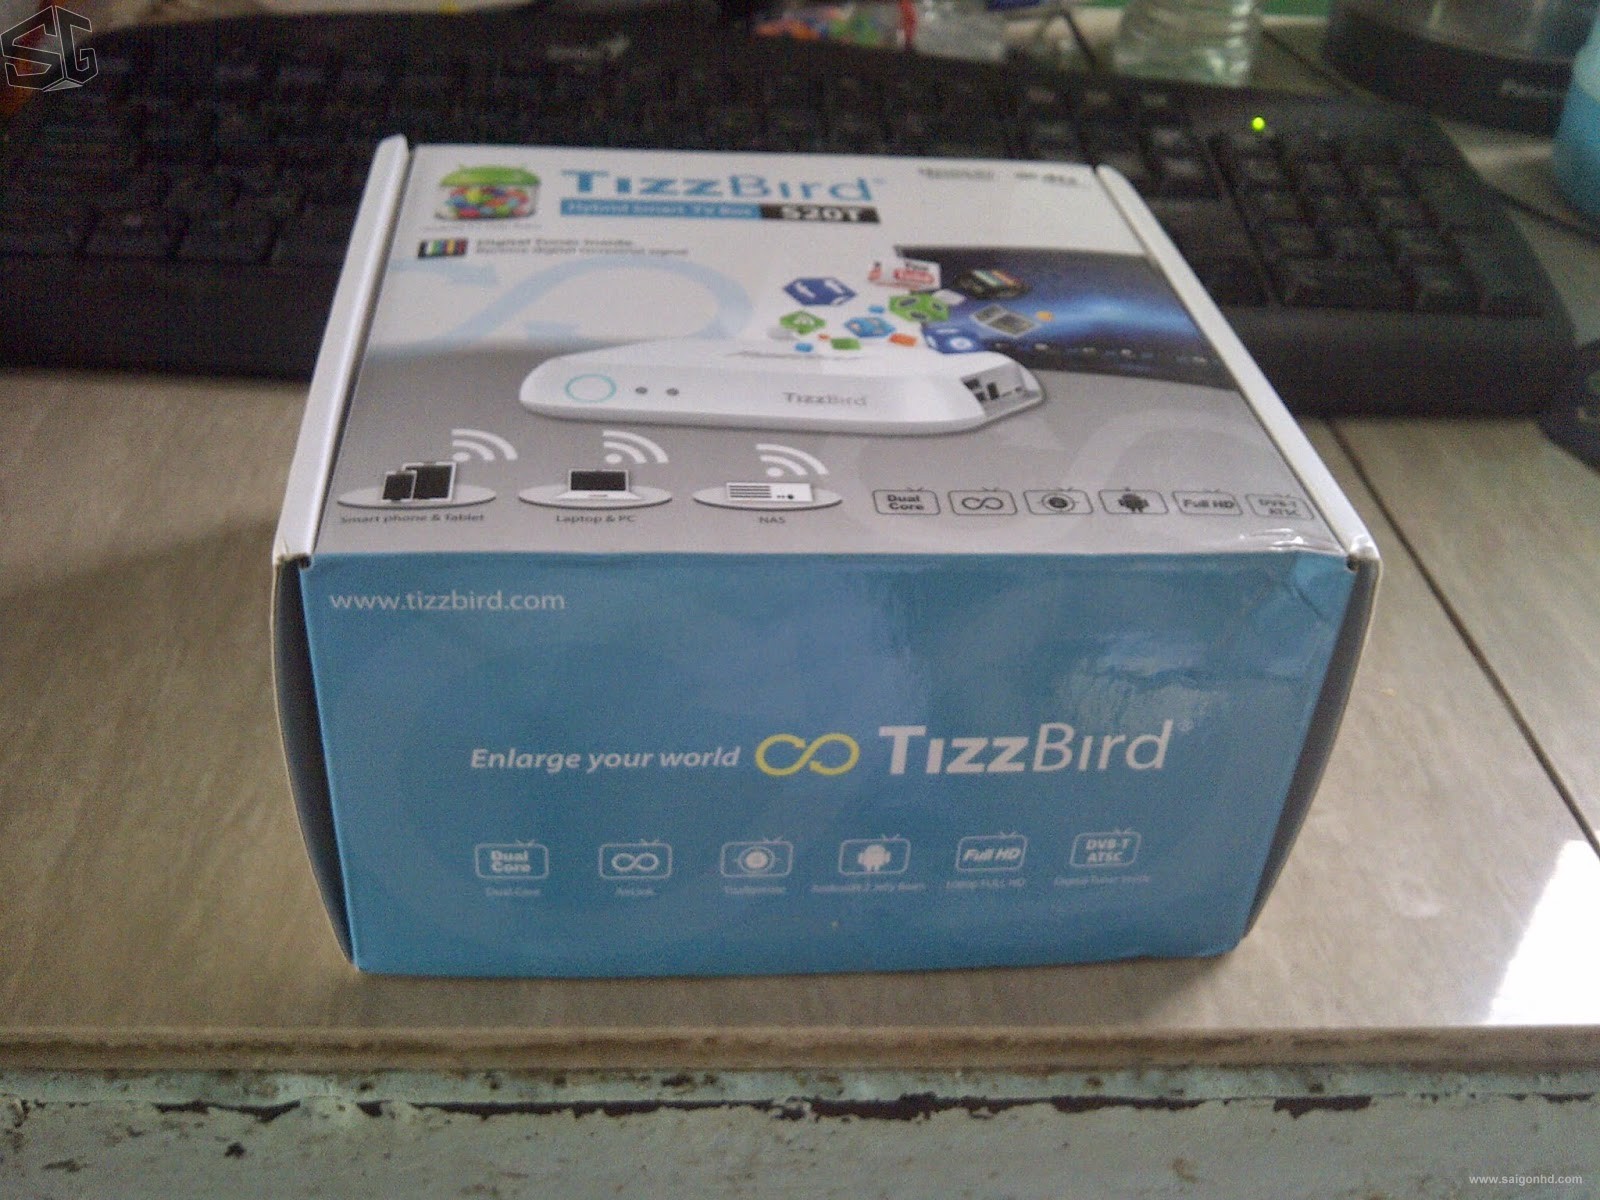 Tizzbird S20t - Android Box Review